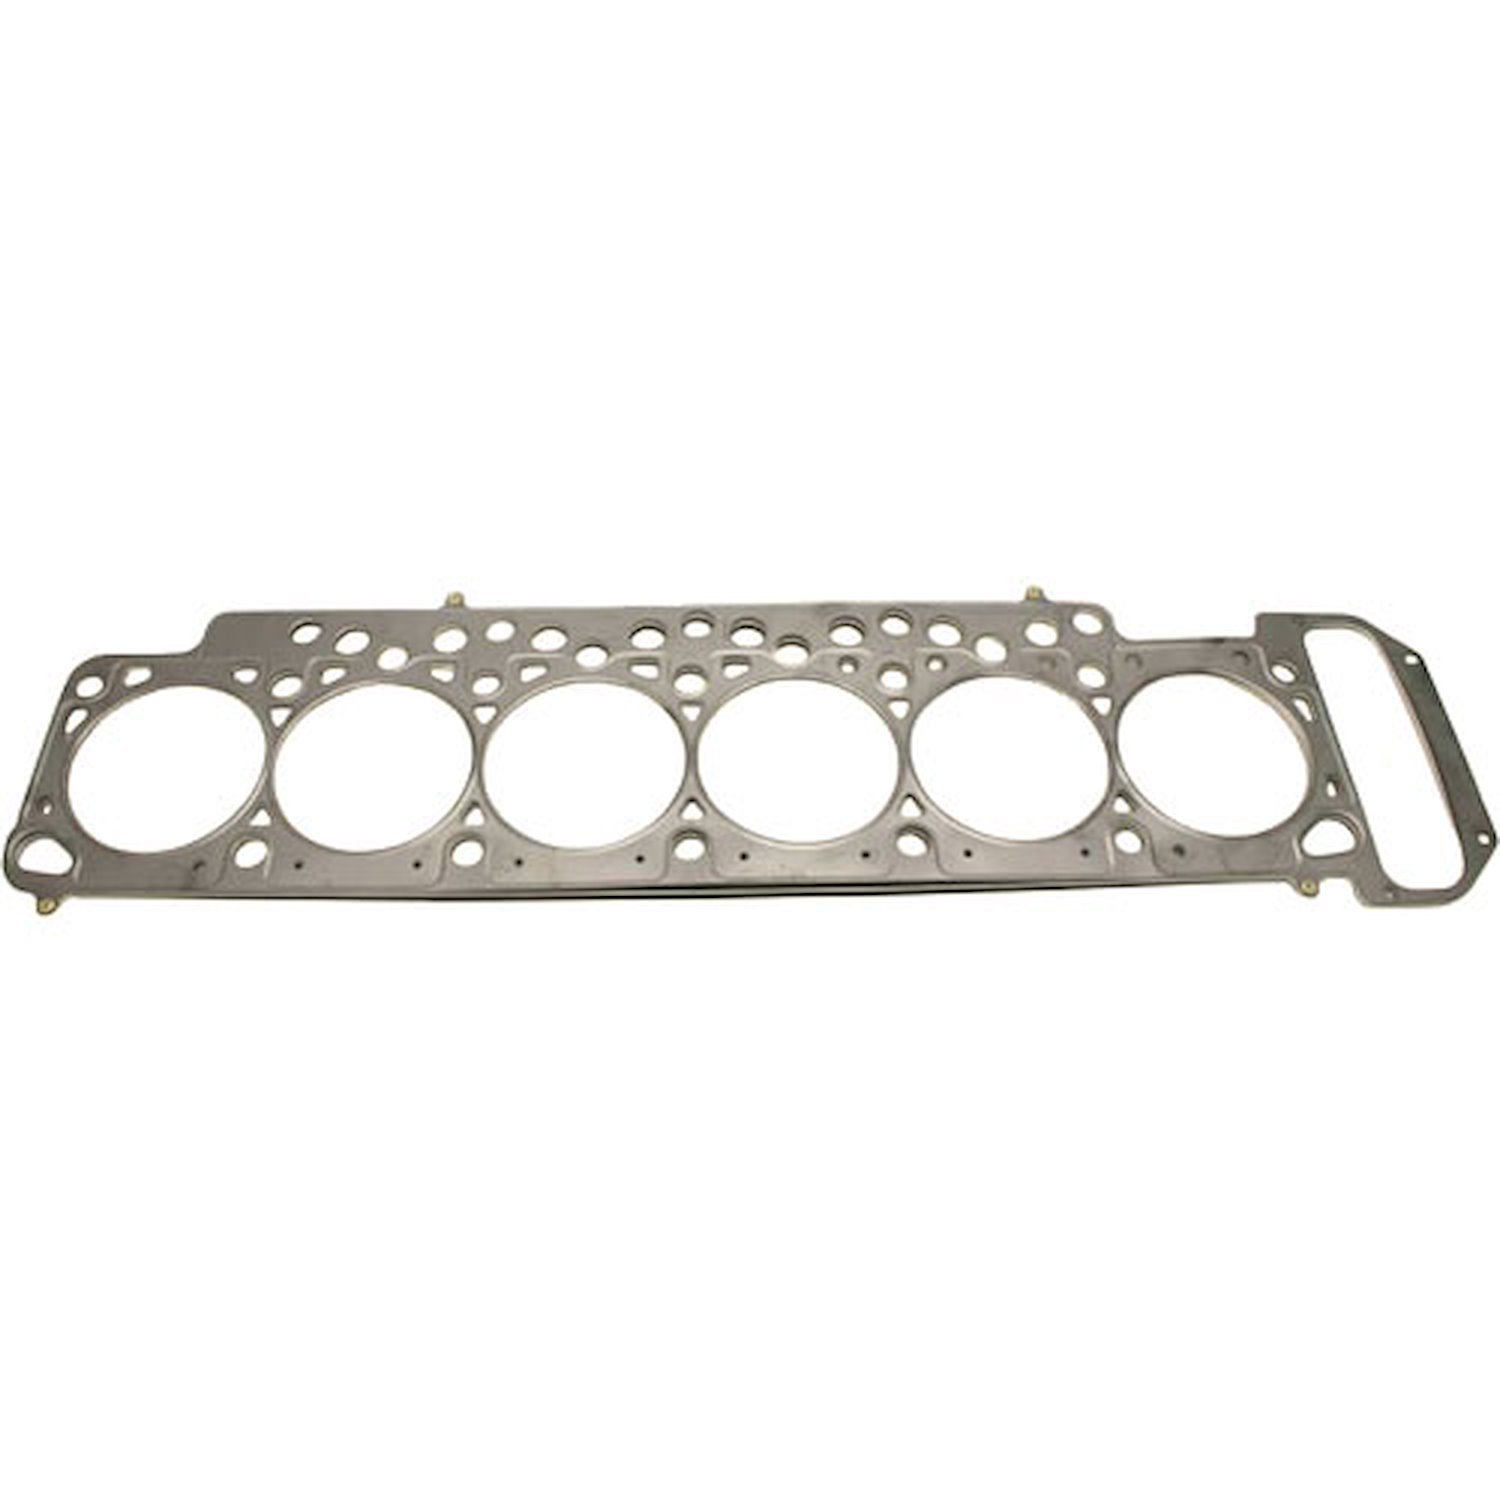 Head Gasket for Select 1987-1993 BMW M5/M6 with S38B35/S38B36 Engines